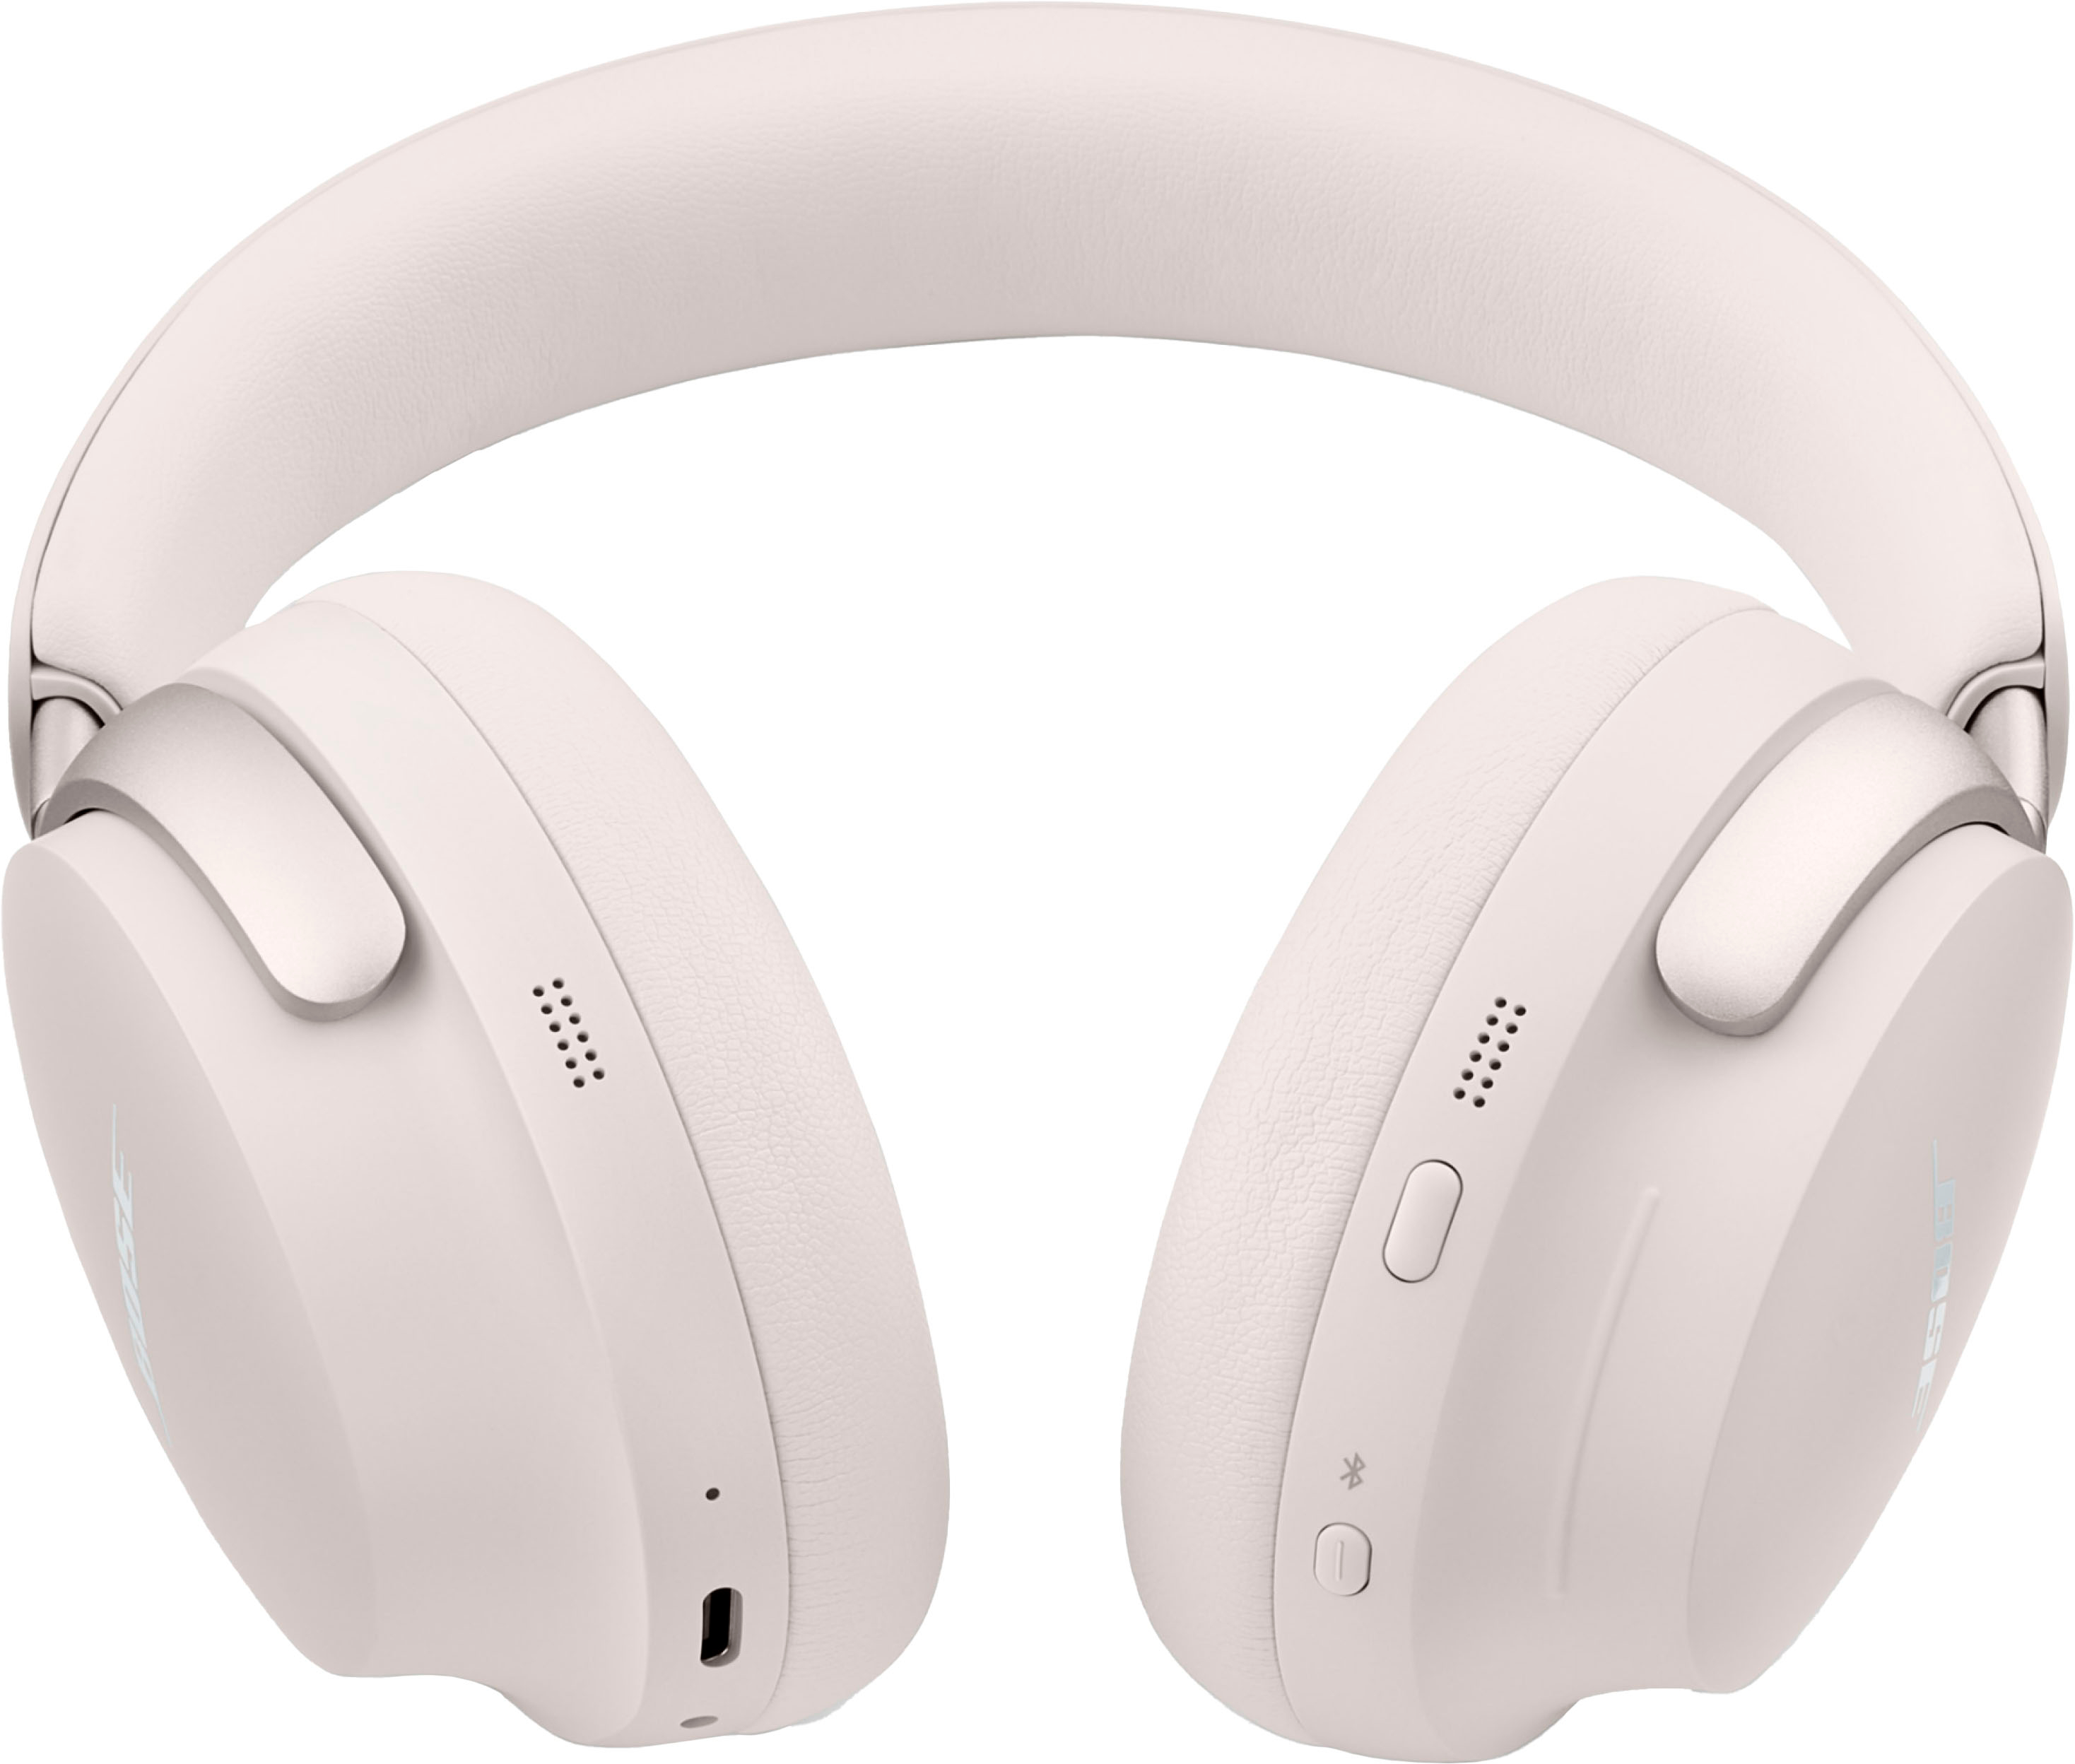 Bose QuietComfort Ultra Wireless Noise Over-the-Ear Best Headphones 880066-0200 White - Cancelling Smoke Buy